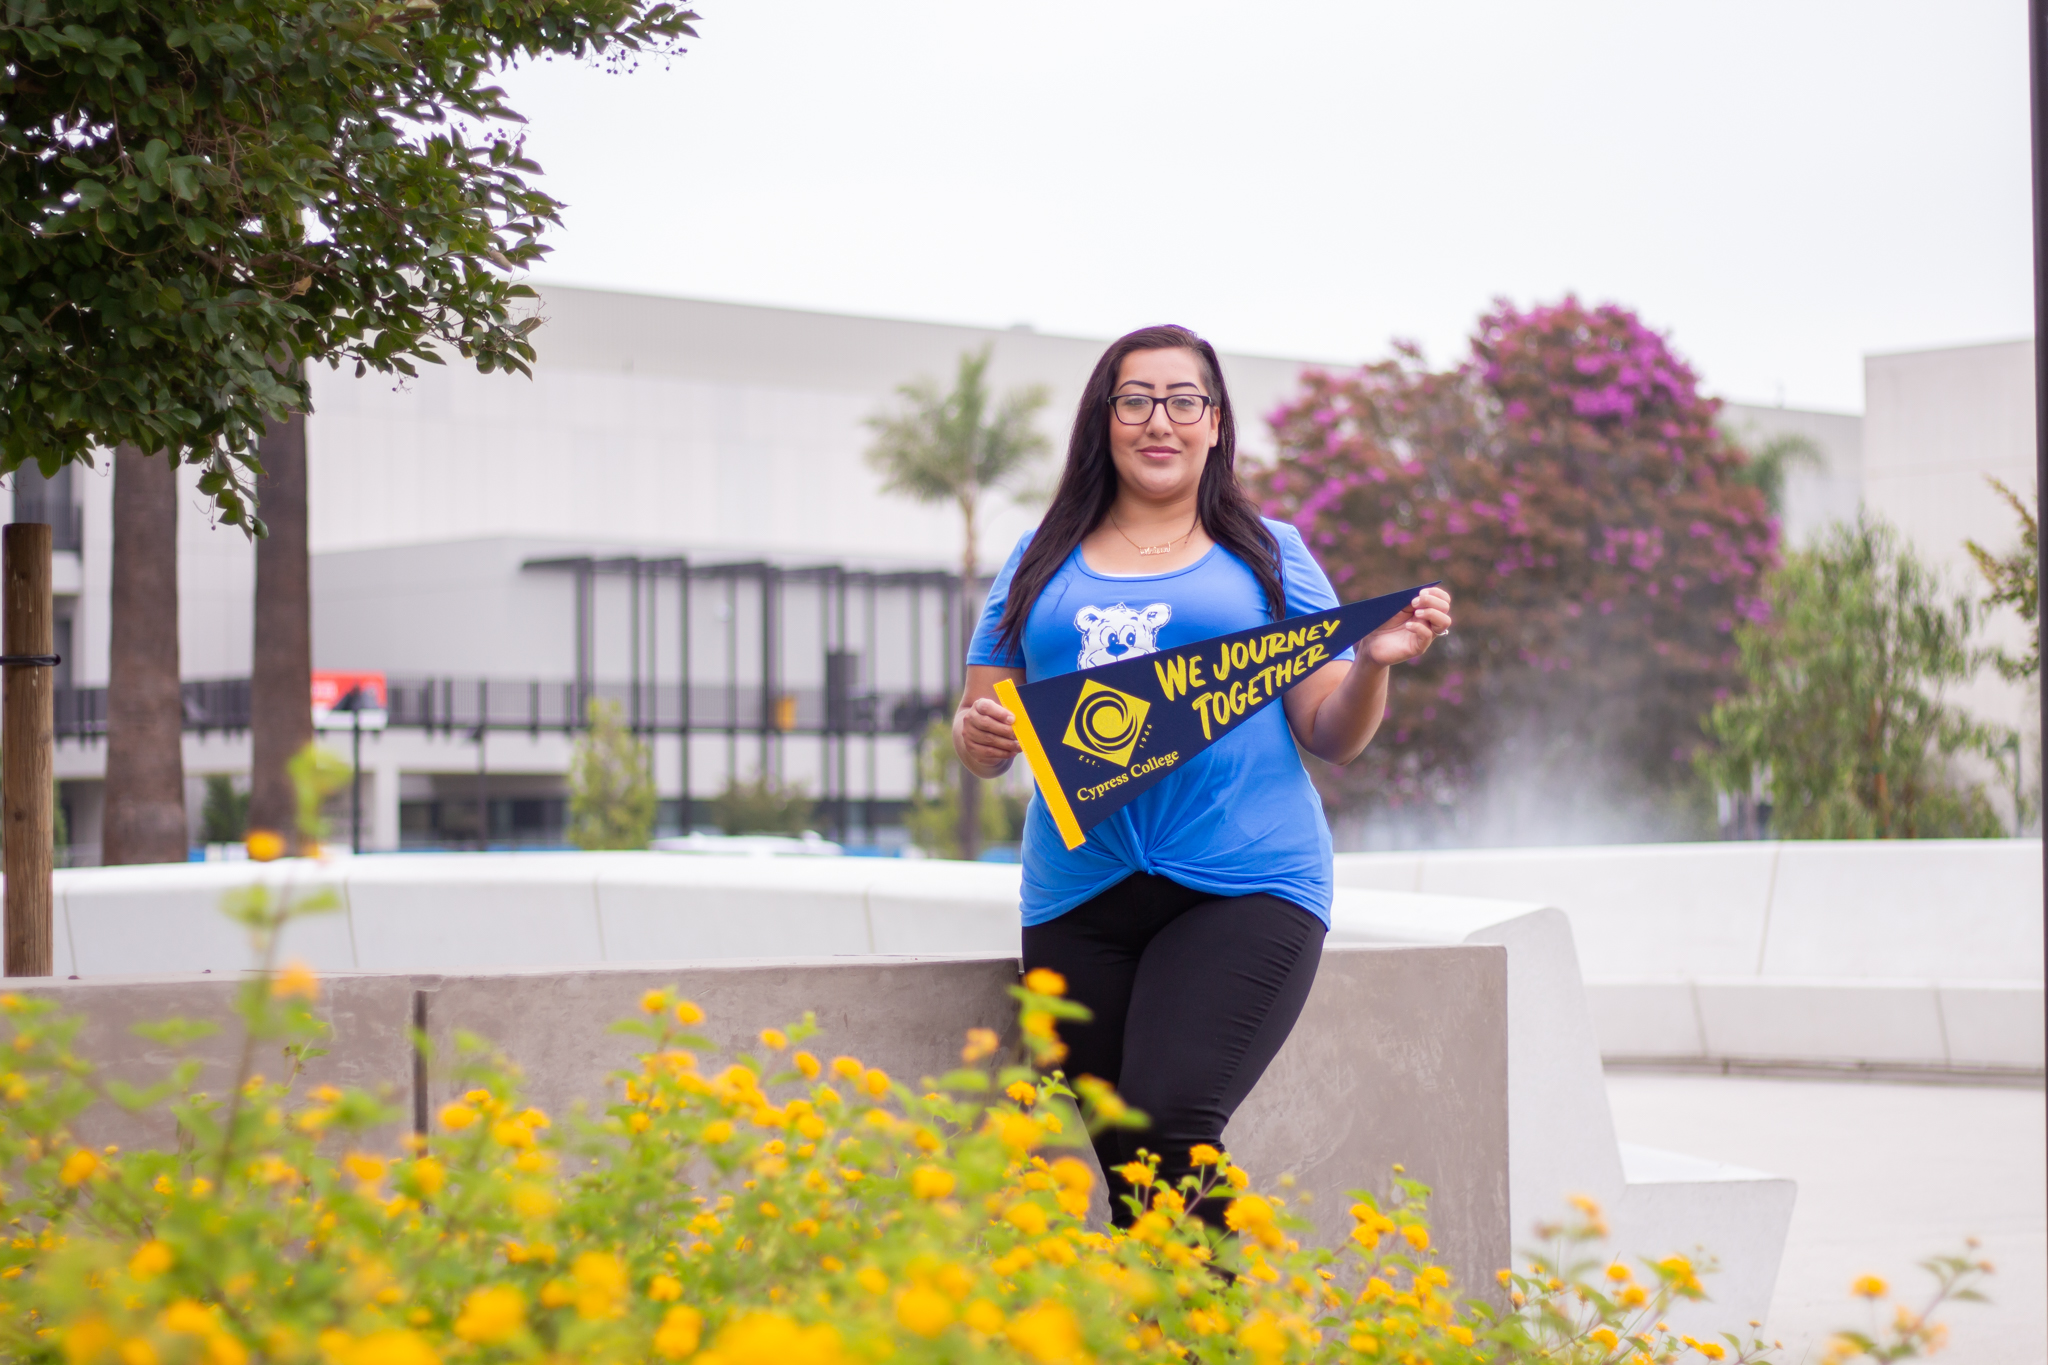 Student Melissa Whitewater stands in front of the Cypress College pond with the Science, Engineering and Math building, as she holds a "We journey together" pennant.